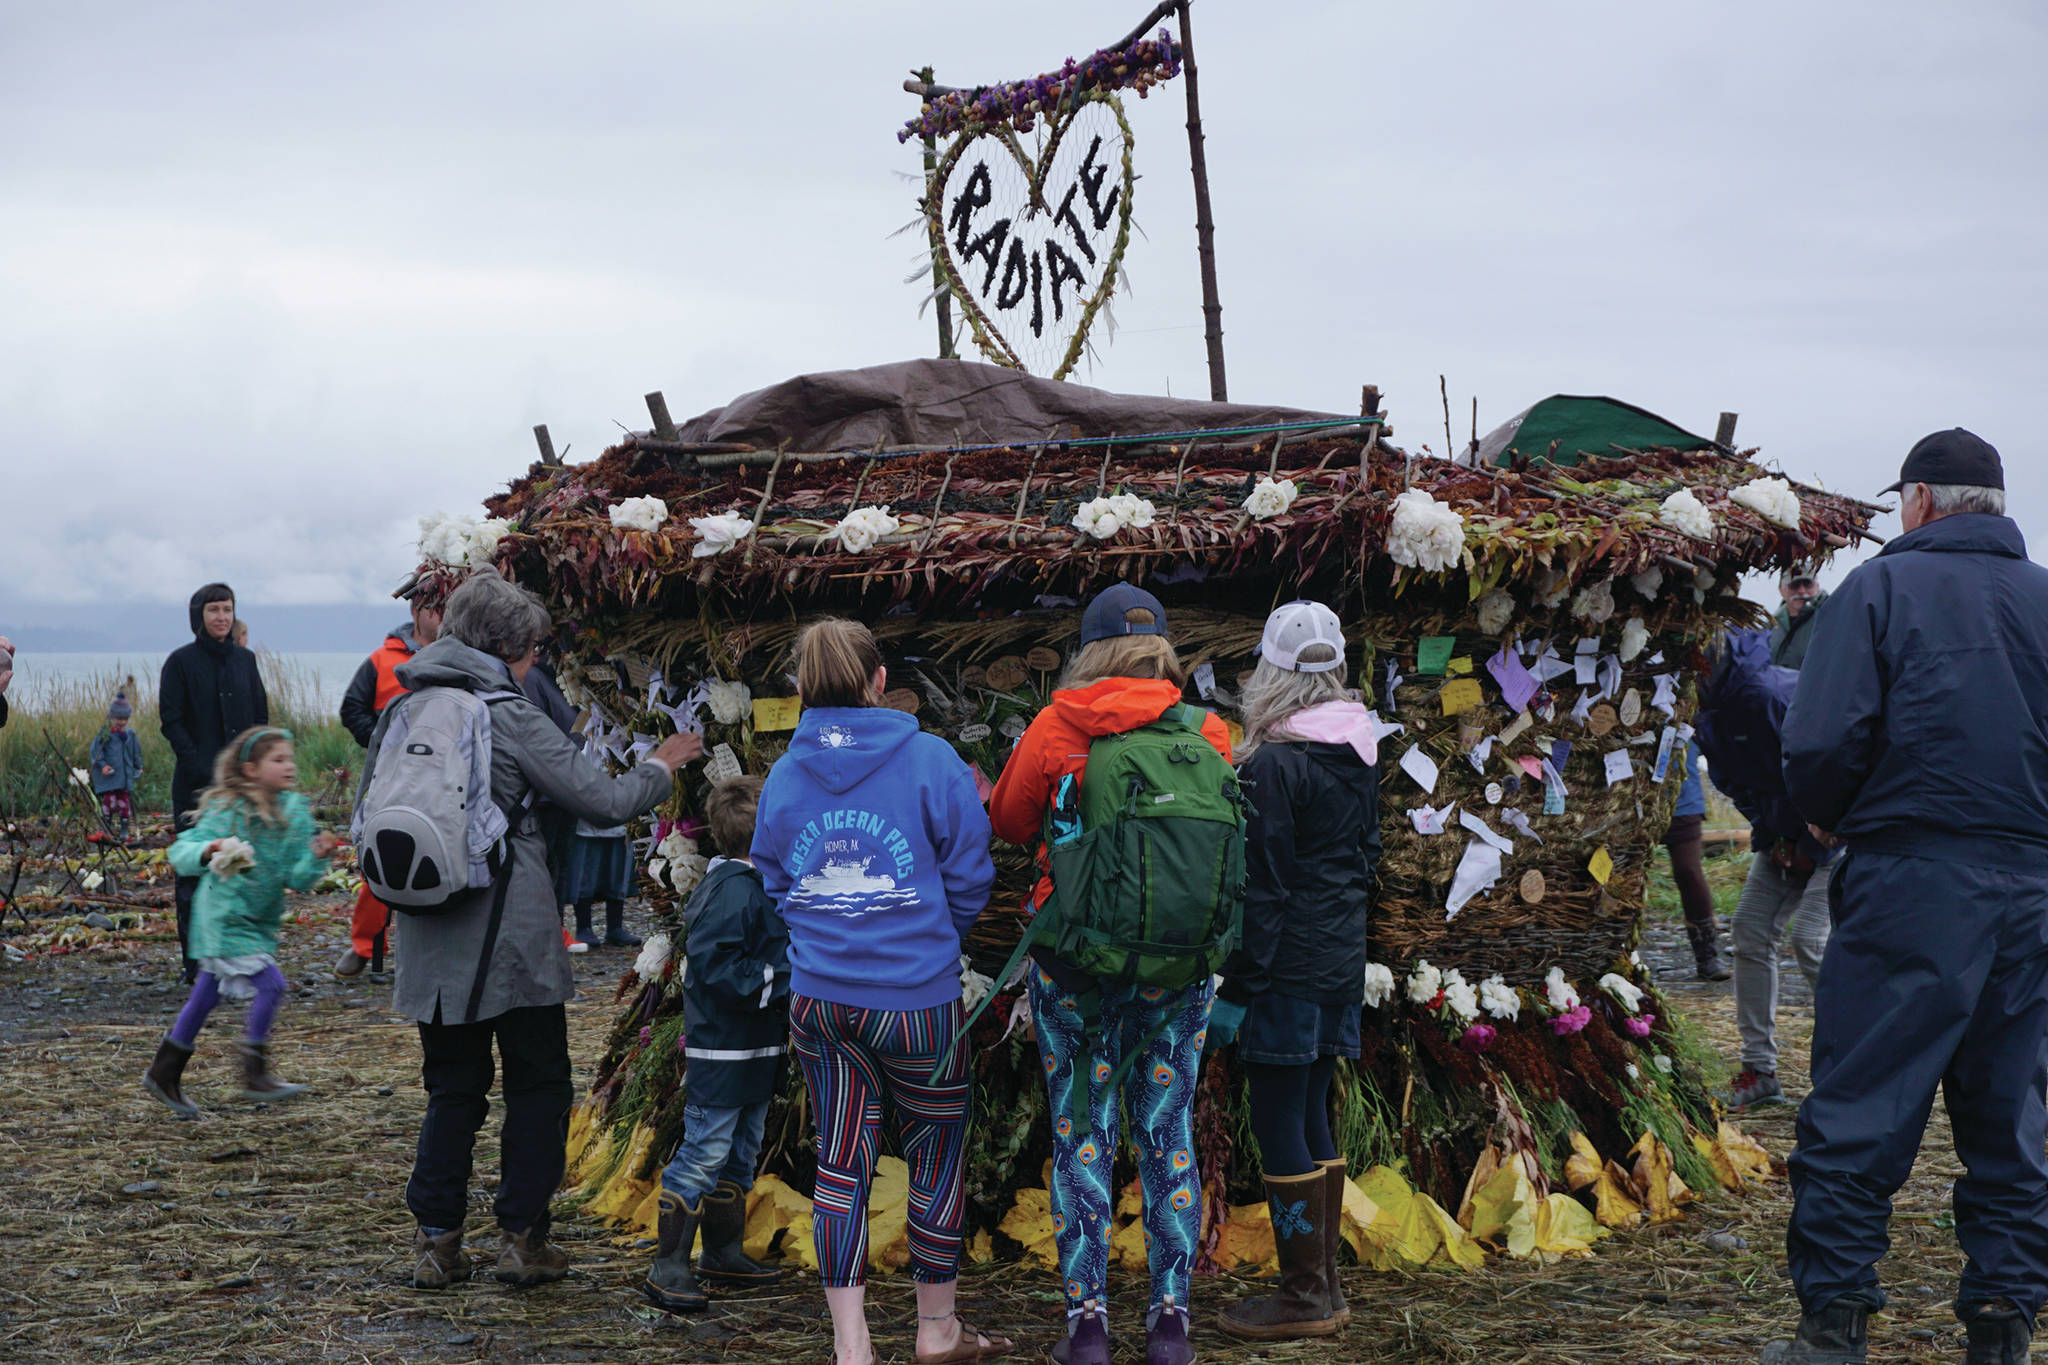 Visitors interact with “Radiate,” the 16th annual Burning Basket, on Sunday night, Sept. 15, 2019, at Mariner Park on the Homer Spit in Homer, Alaska. (Photo by Michael Armstrong/Homer News)